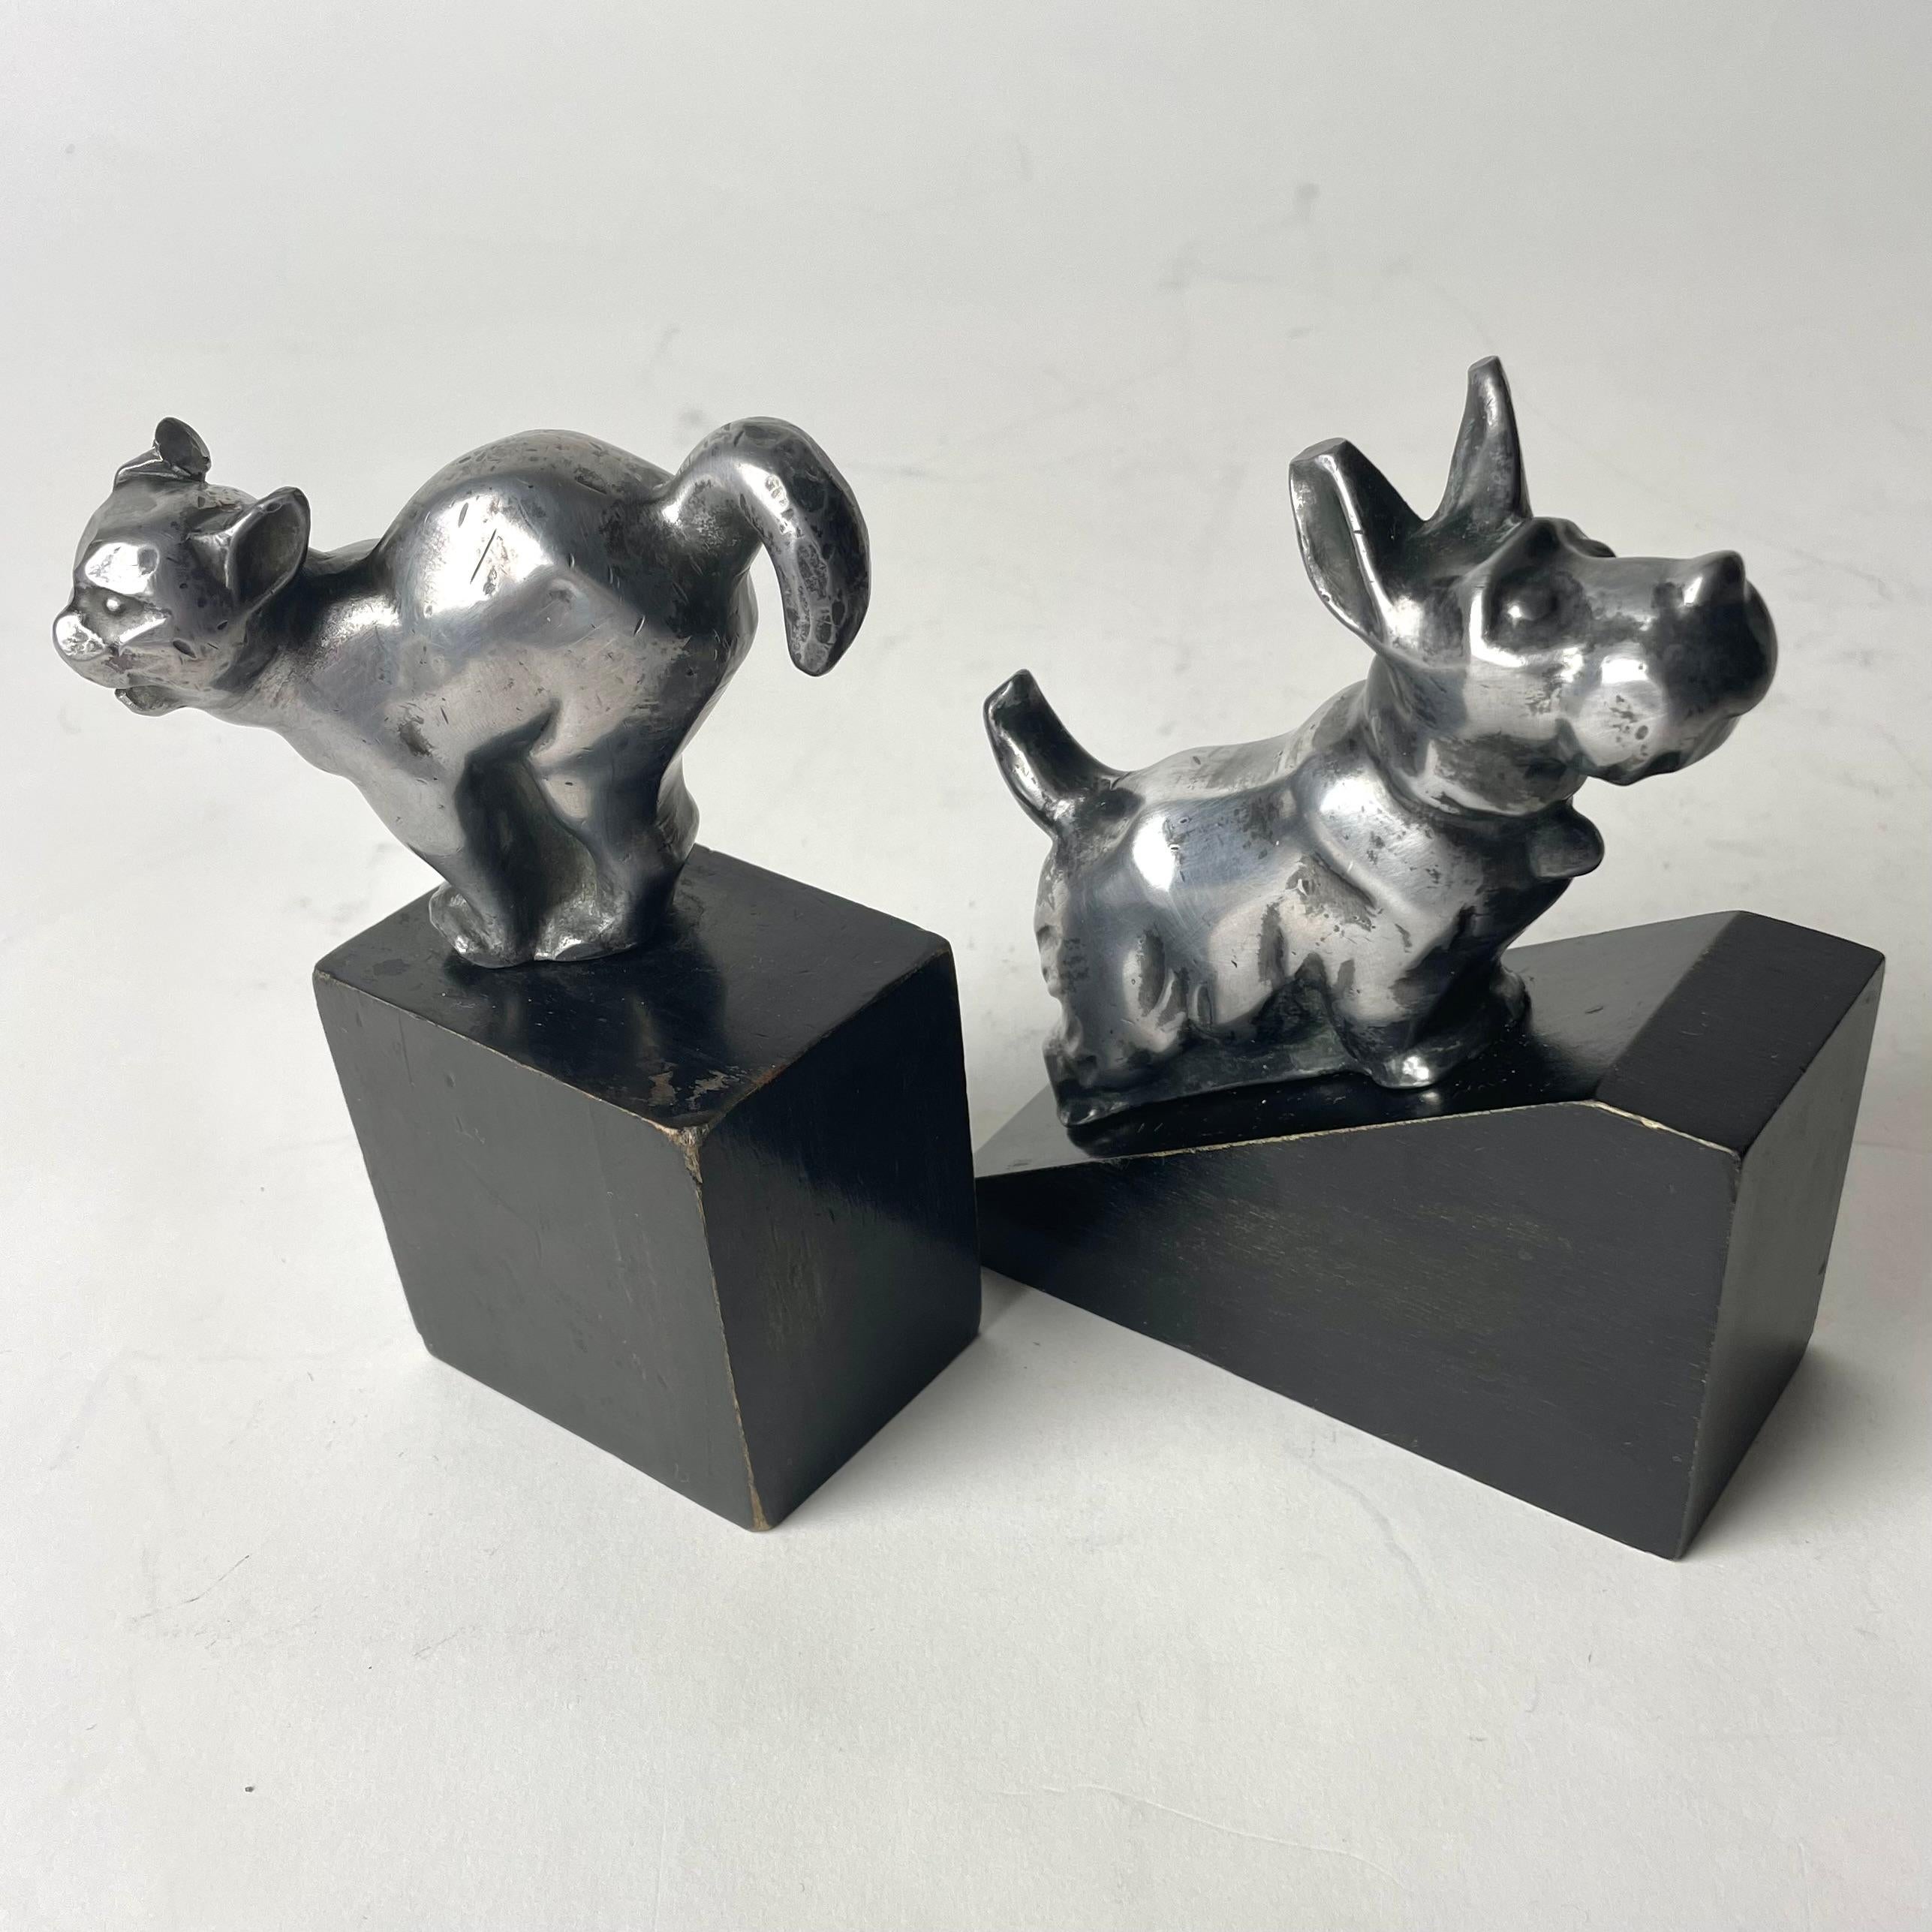 Early 20th Century A charming pair of Art Deco Bookends with a dog and a cat from the 1920s-1930s